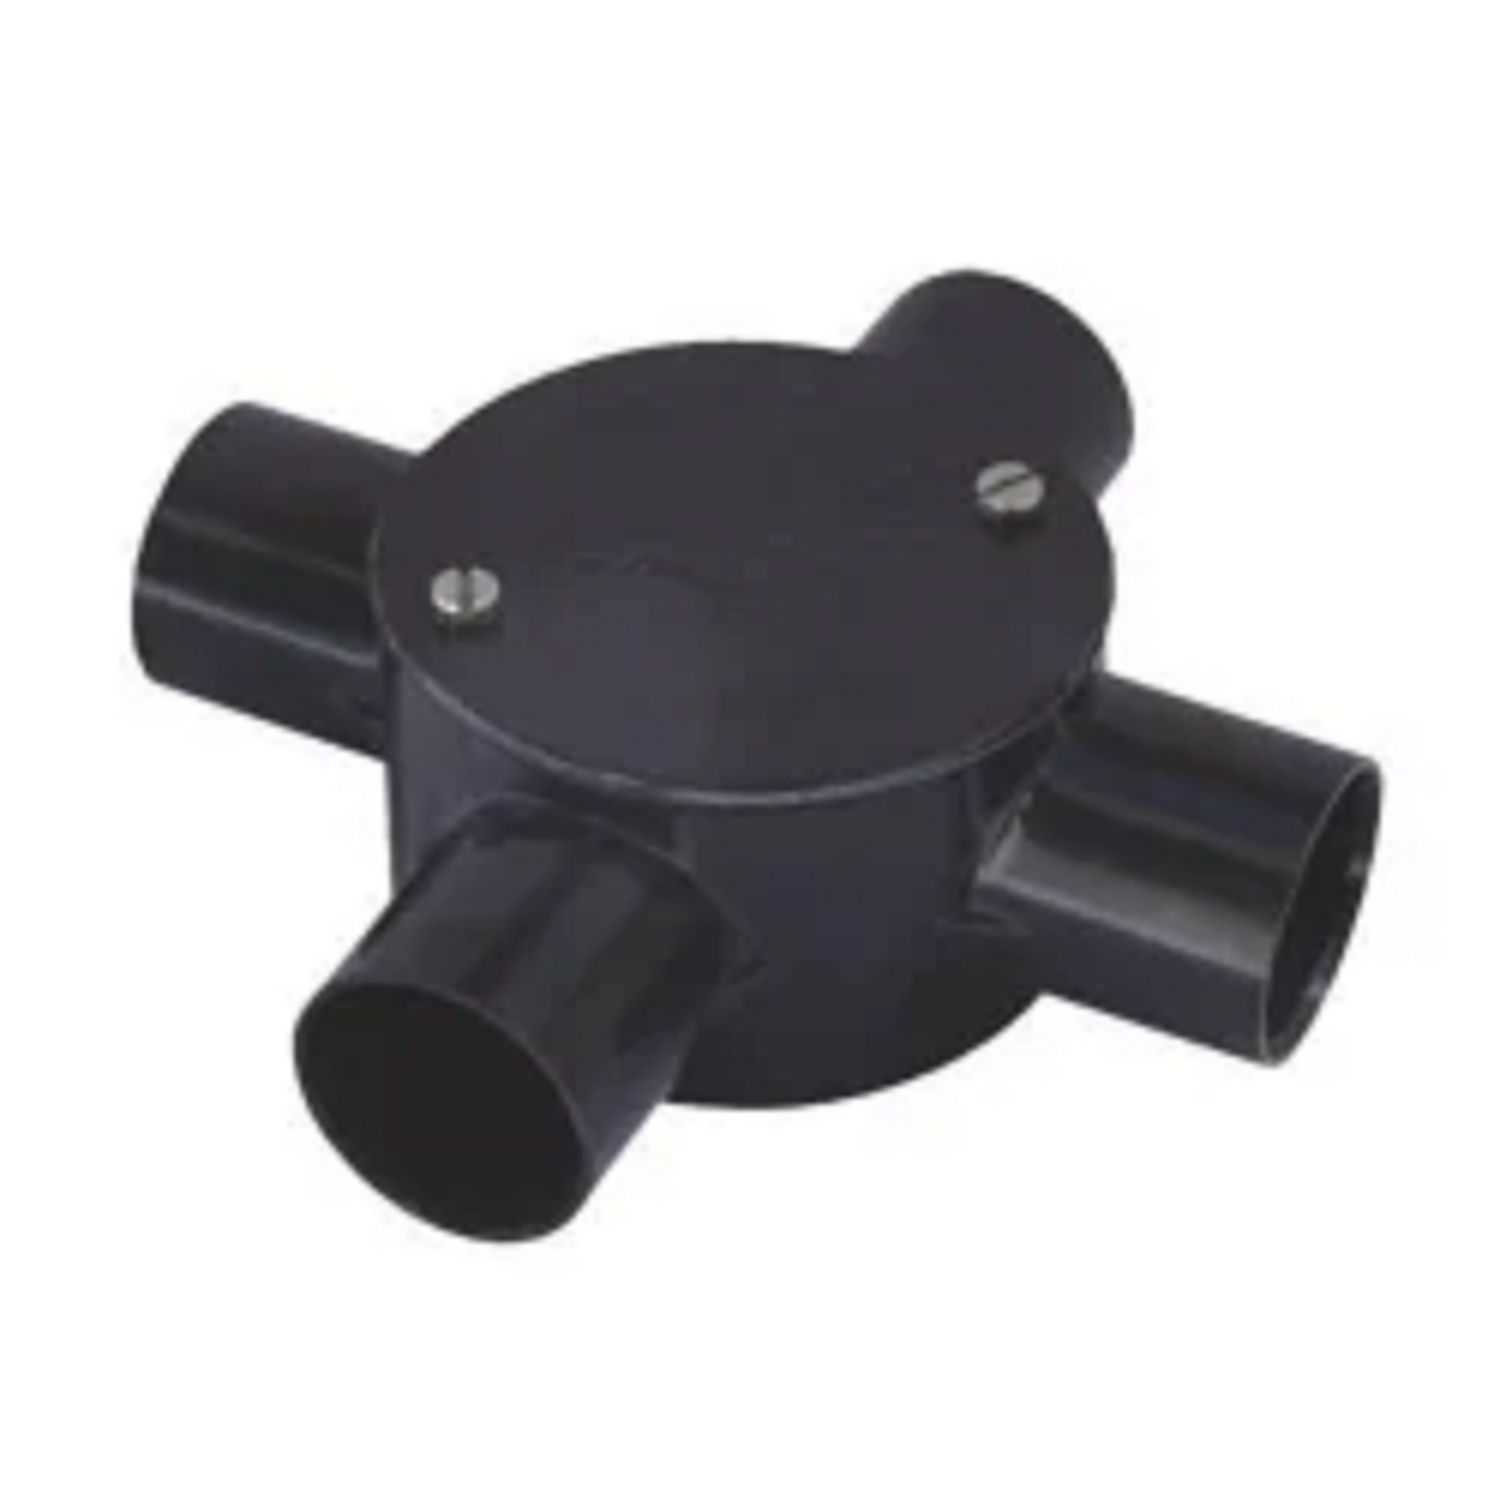 25 MM Precision Four-Way Flate Junction Box Black And Heavy Duty